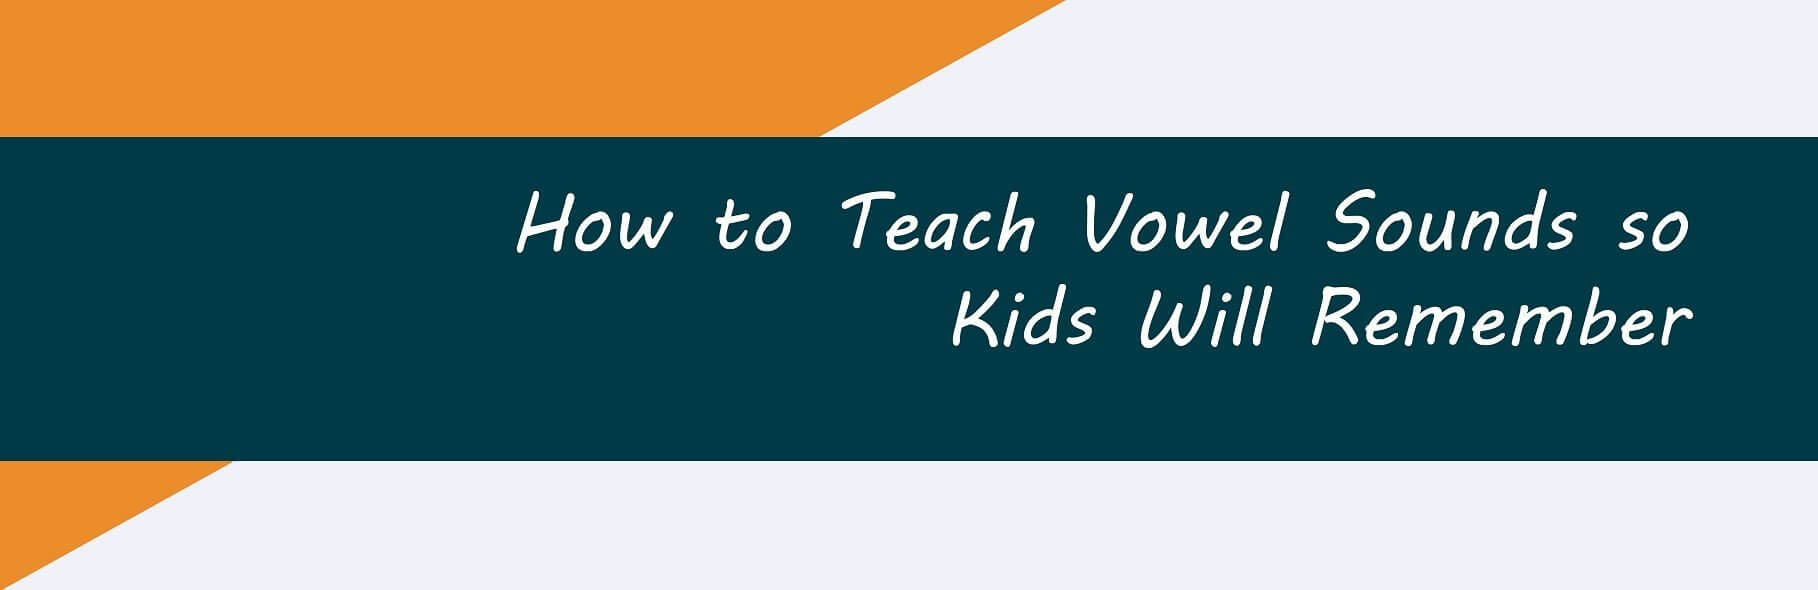 How to Teach Vowel Sounds so Kids will Remember Infographic